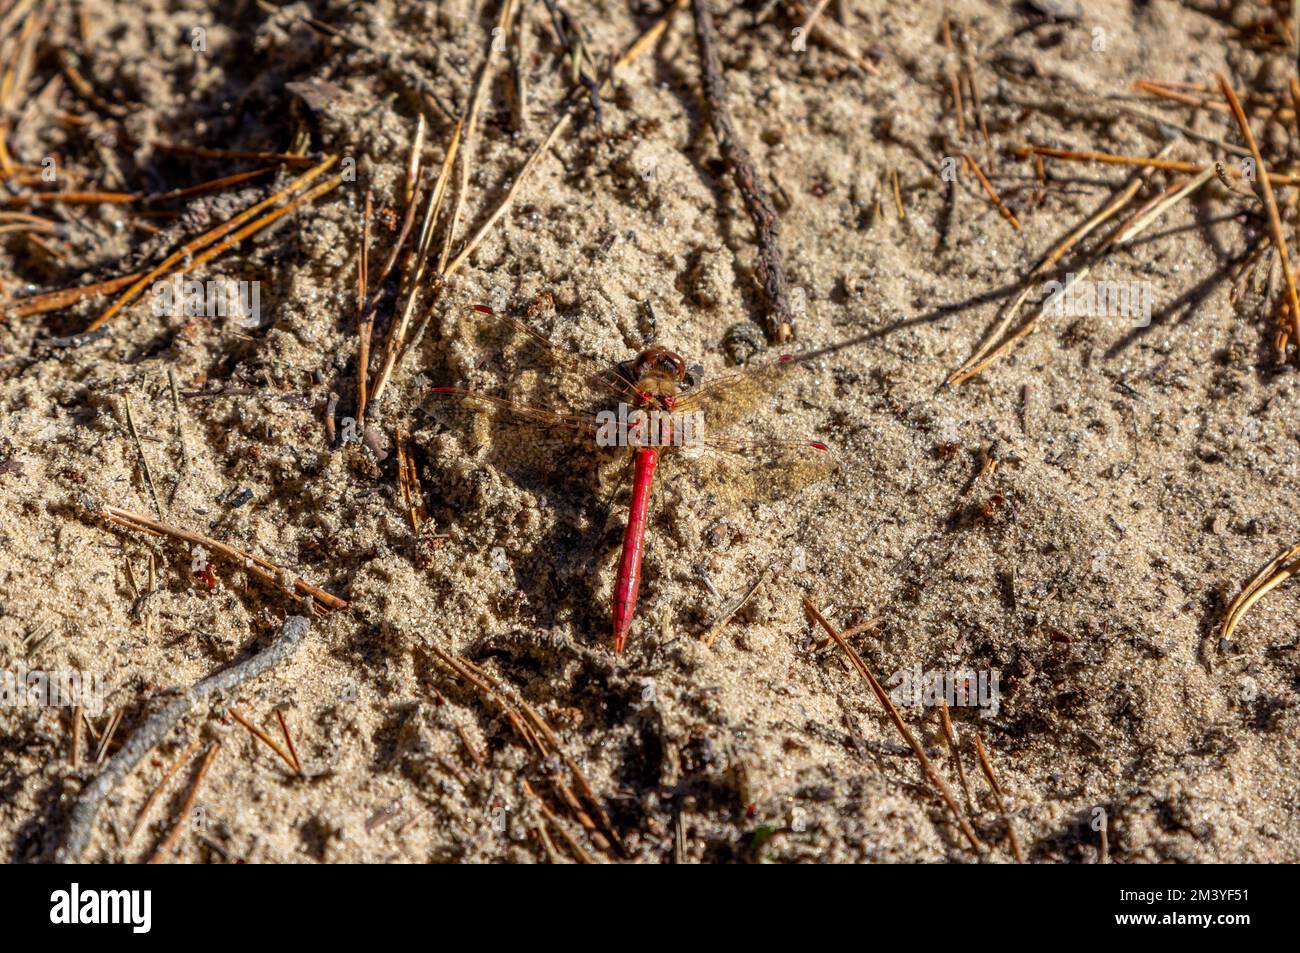 Close-up dragonfly with red body and transparent wings on sand Stock Photo